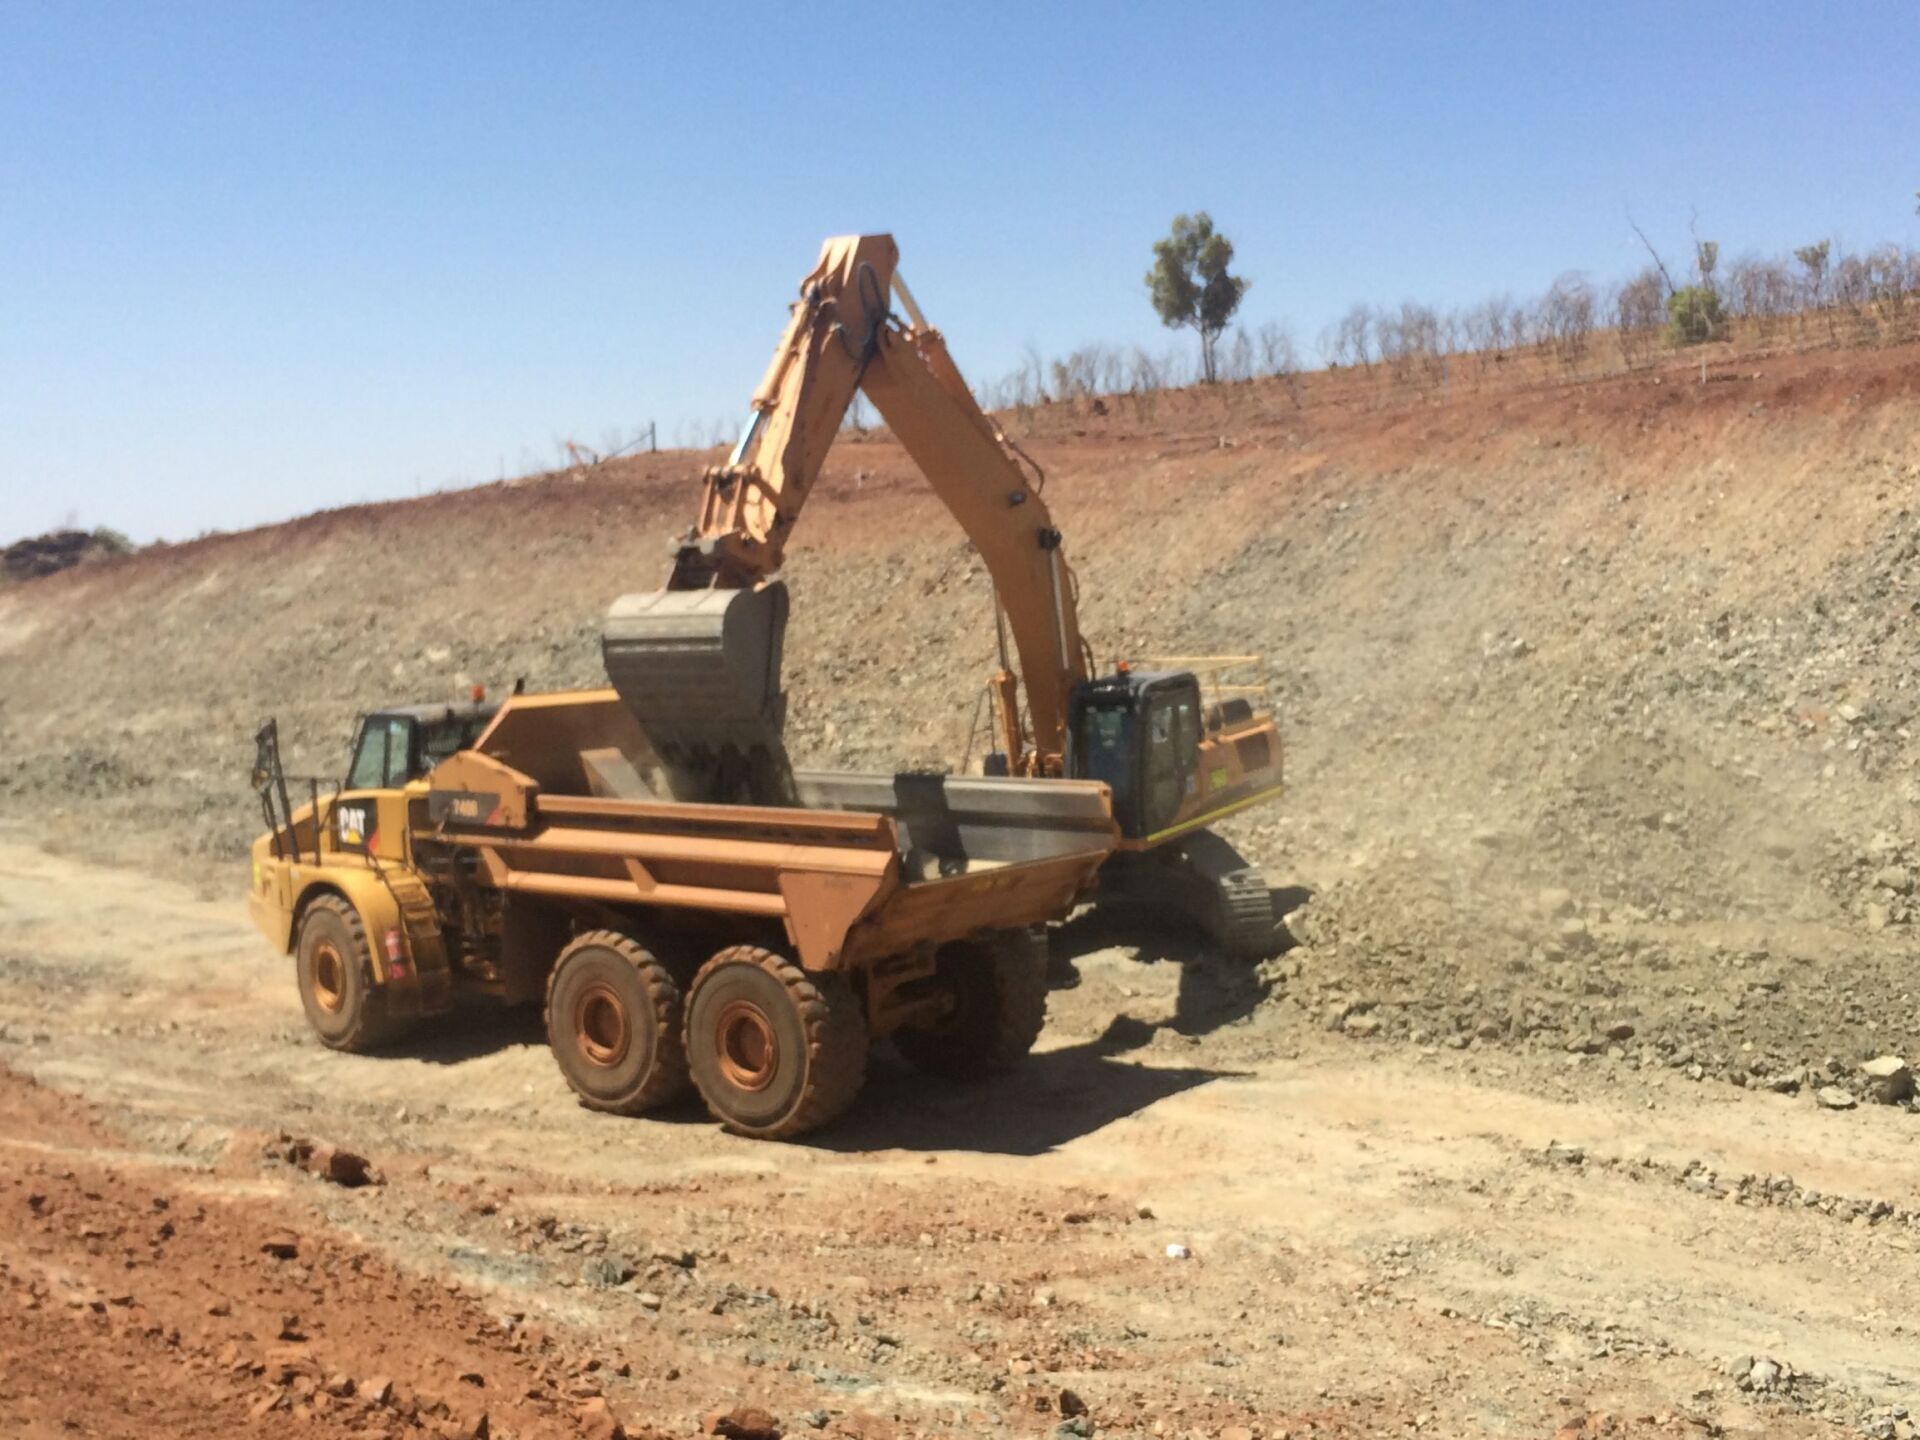 Heavy Equipment for Excavation — Civil Works in Mt. Isa, QLD